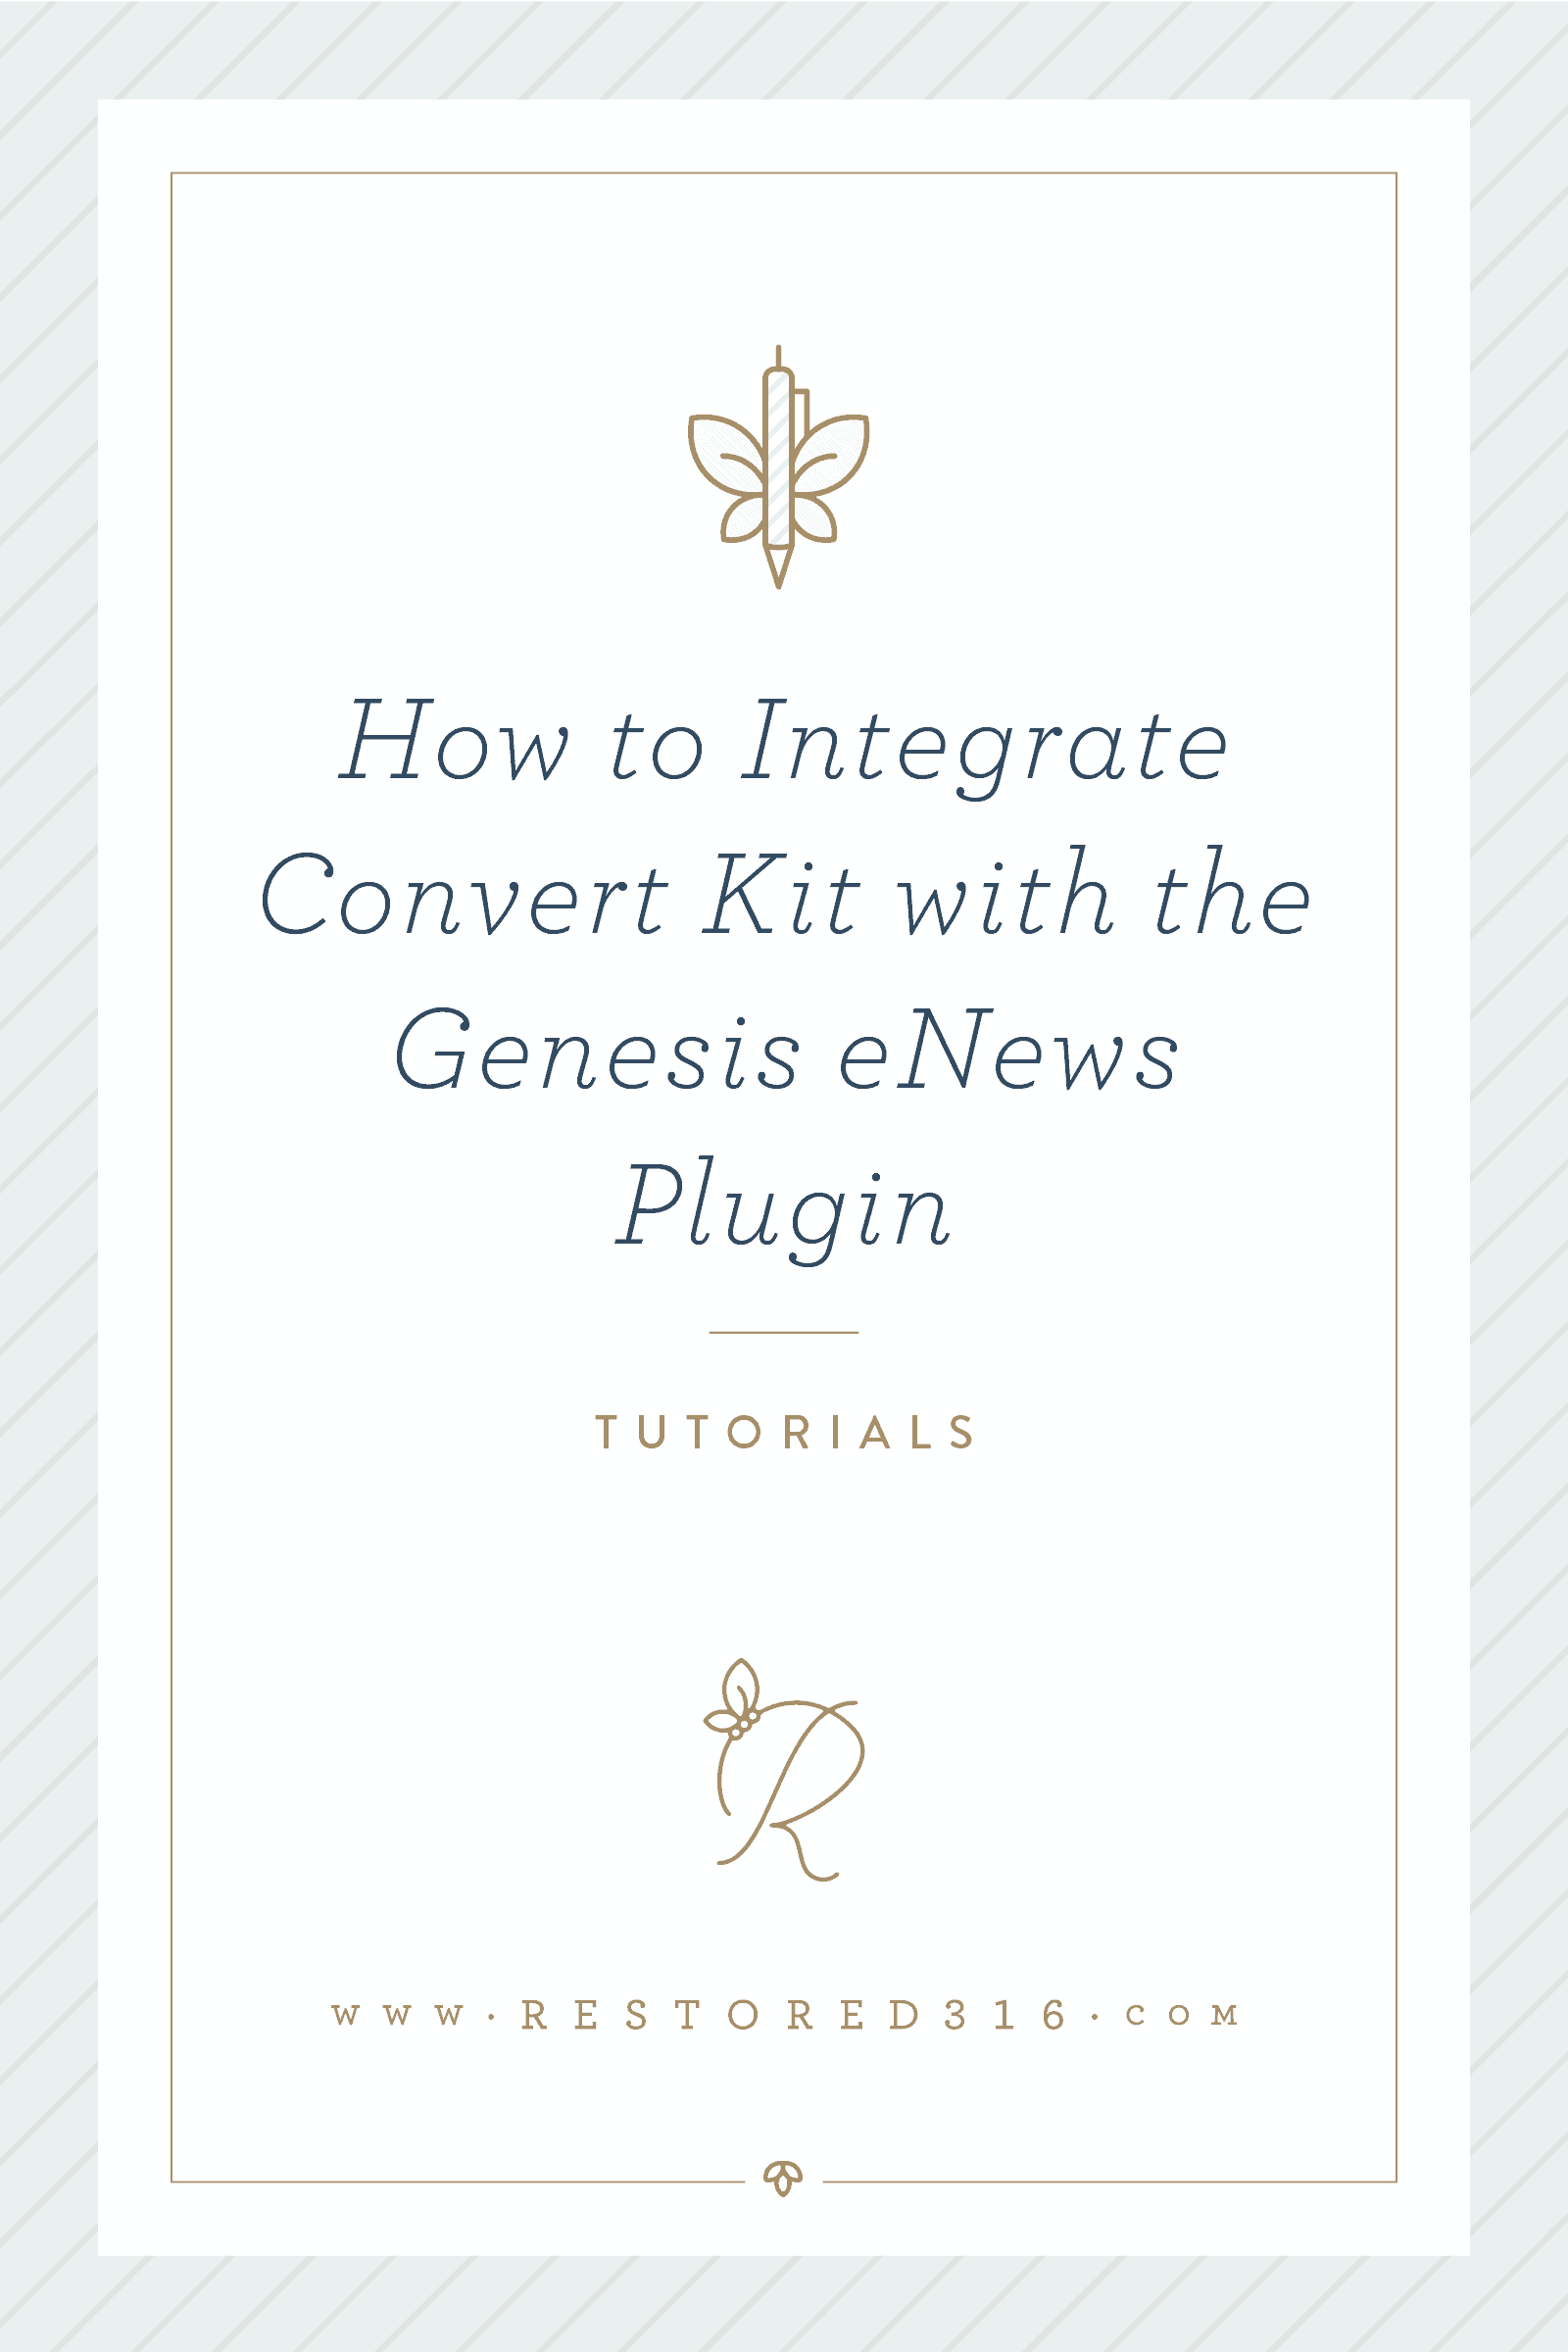 How to Integrate Convert Kit with the Genesis eNews Plugin